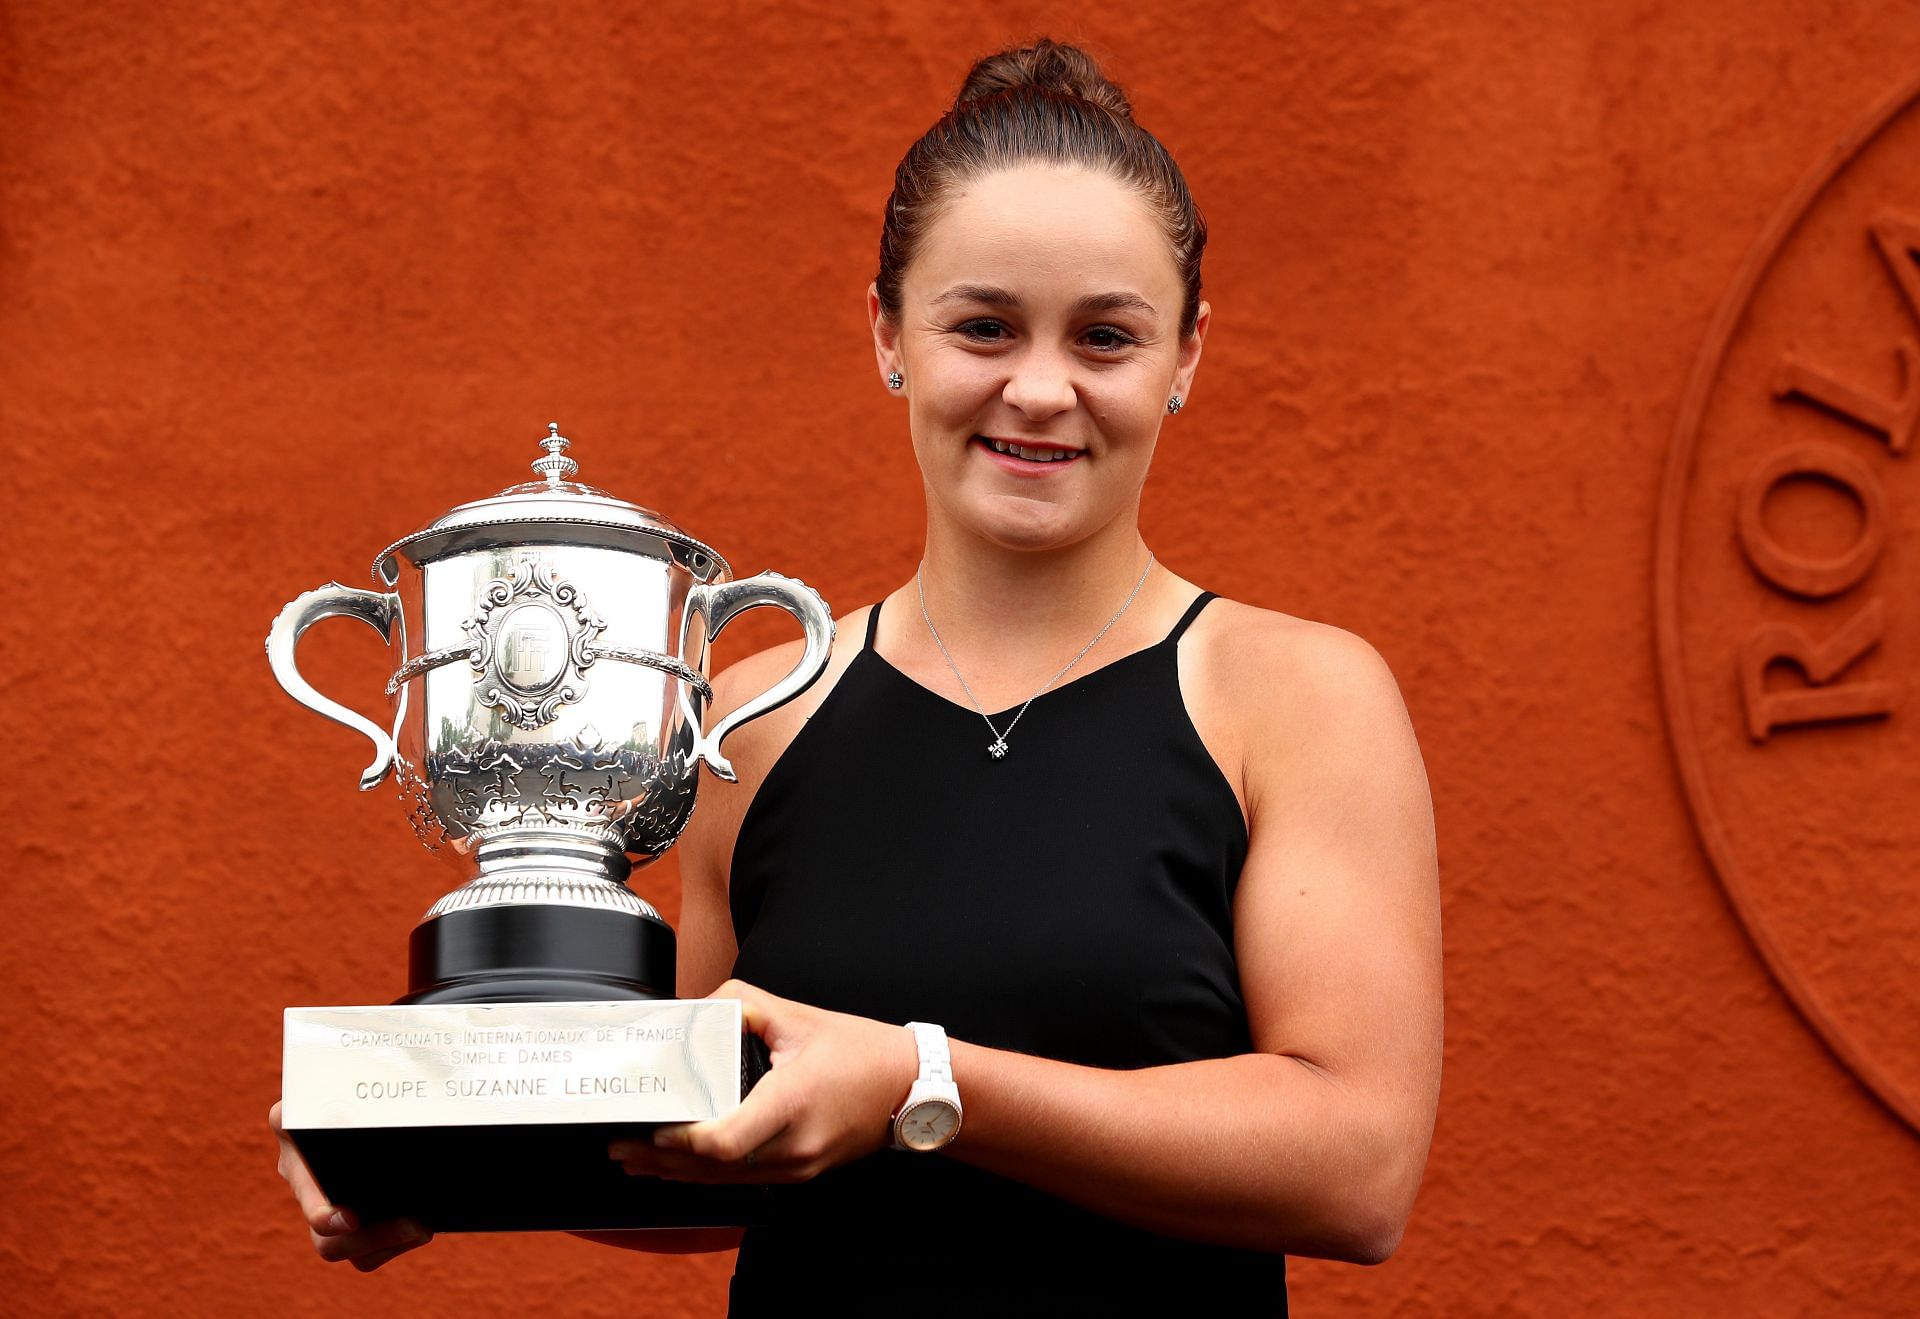 Ashleigh Barty&#039;s ascendancy began after the message from Serena Williams